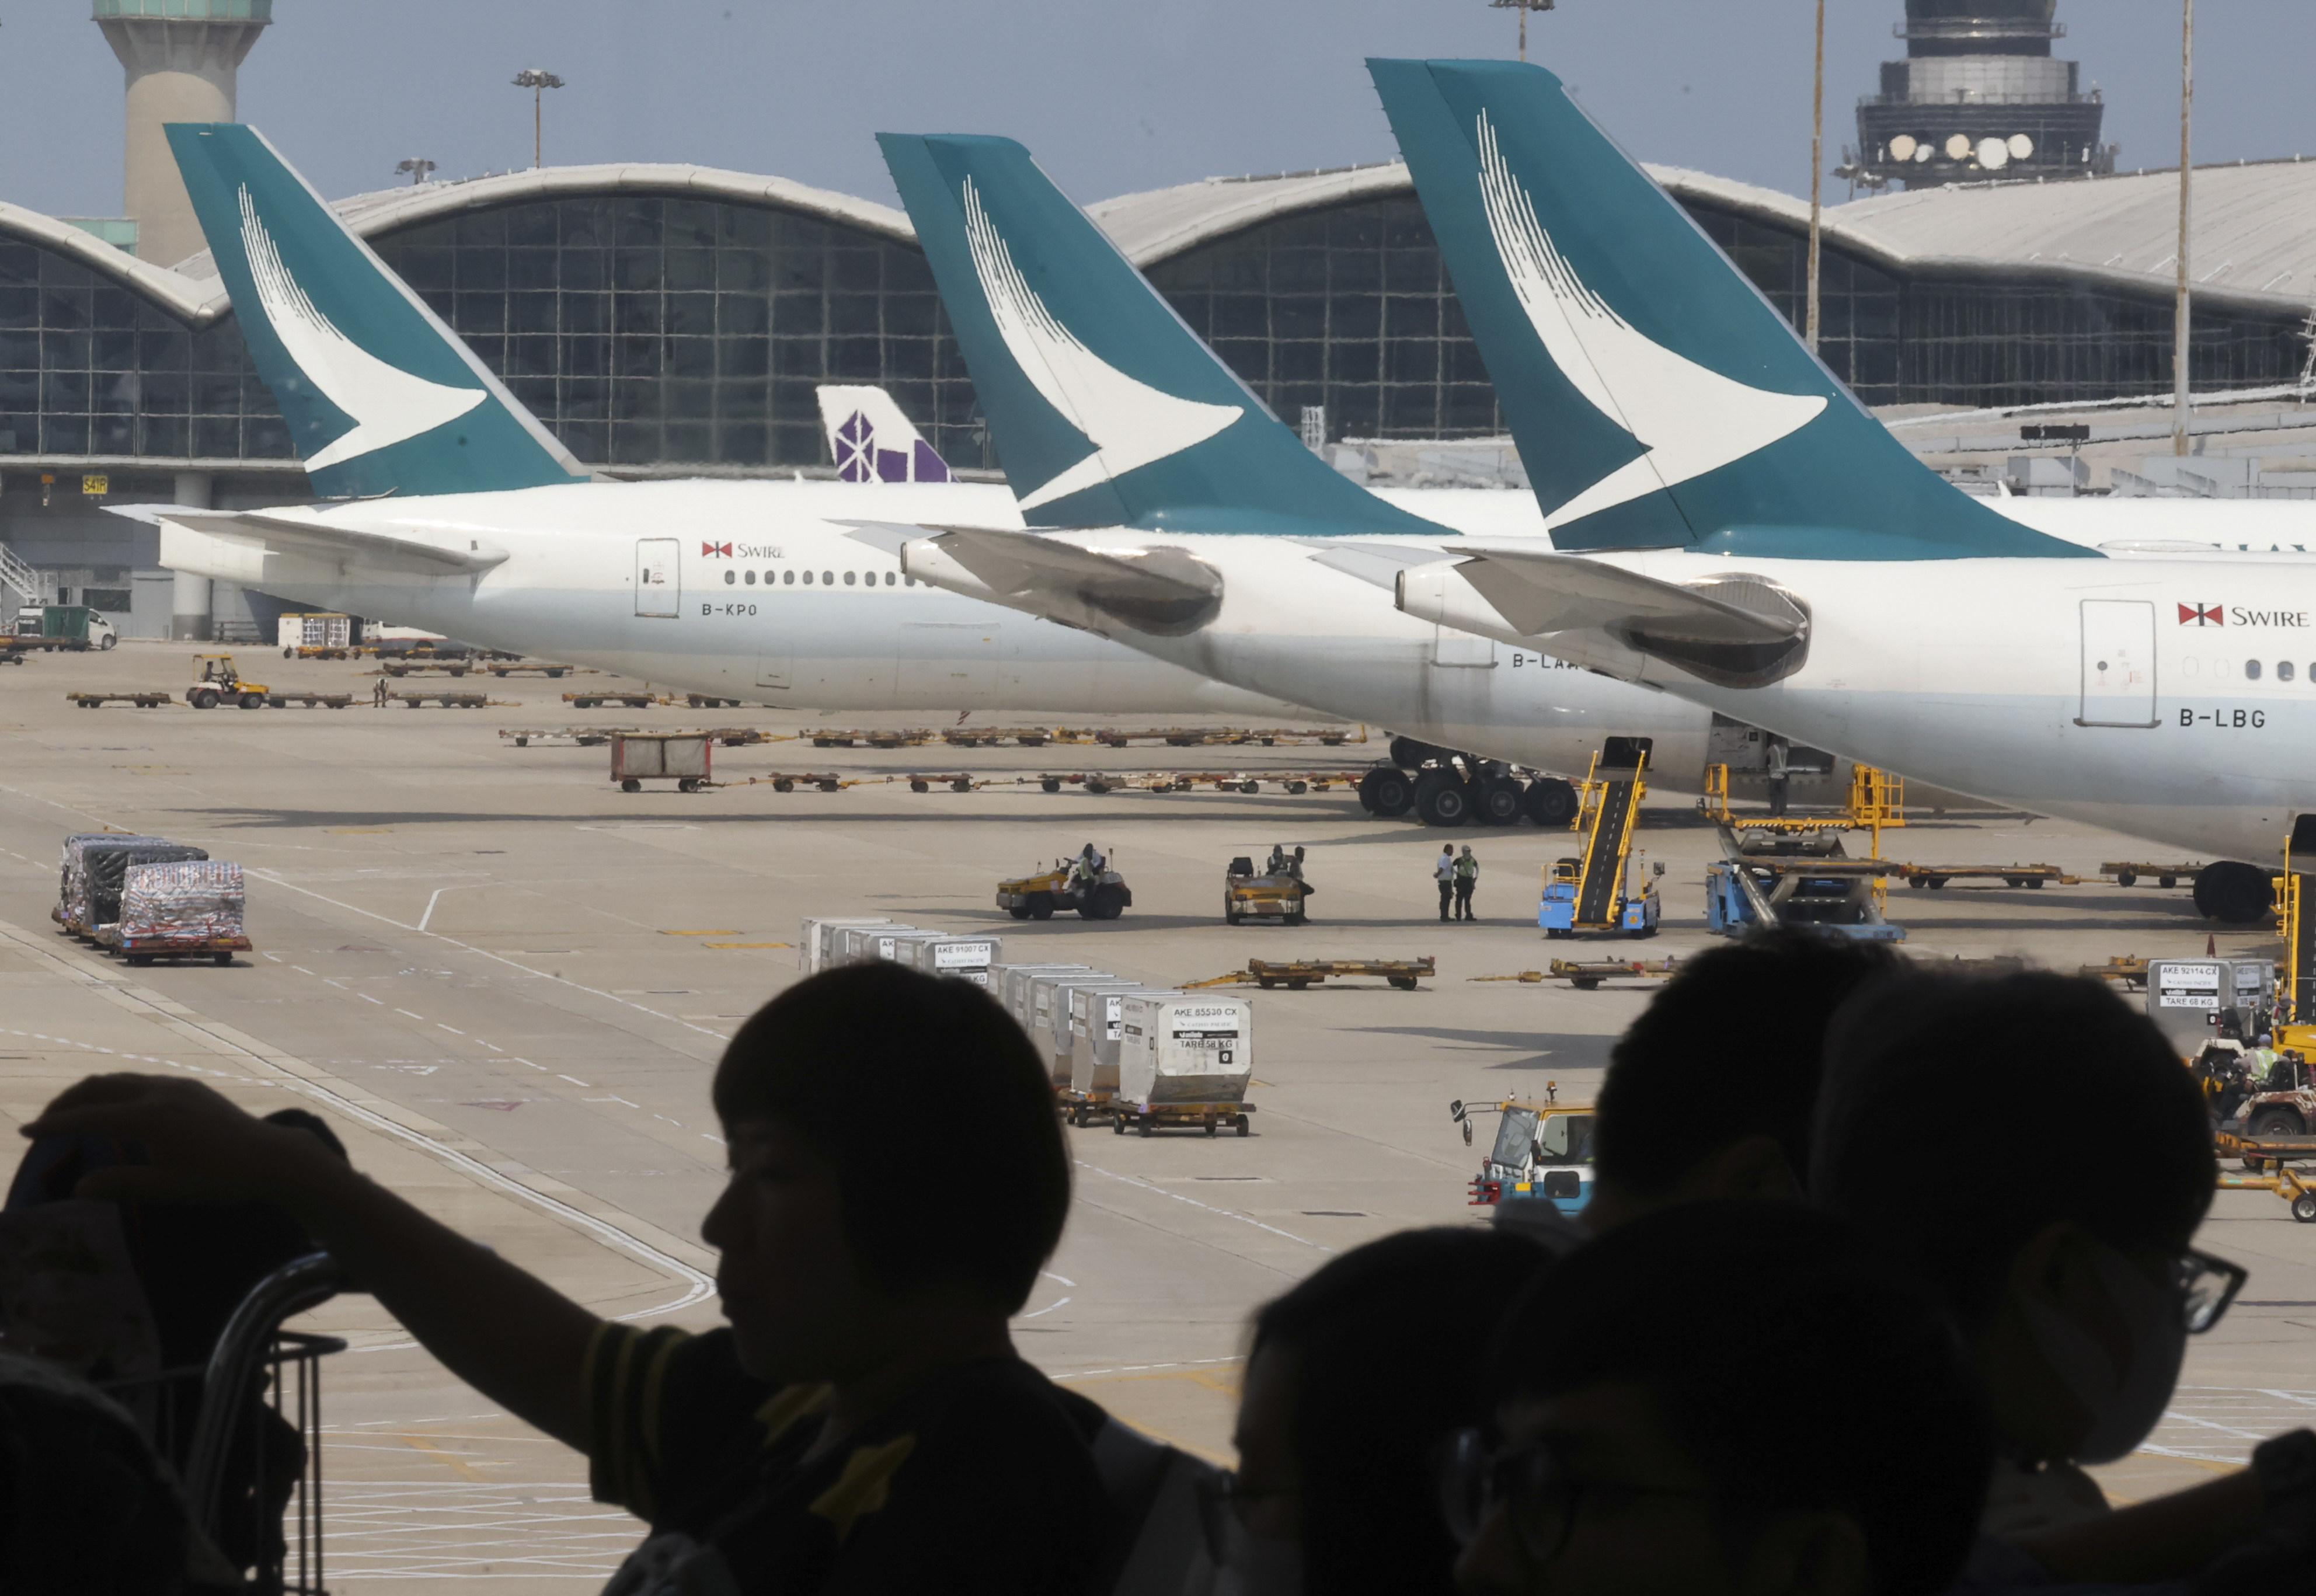 Cathay Pacific has hired about 40 cadet pilots from mainland China, but a union warns staffing levels are still low. Photo: Jonathan Wong